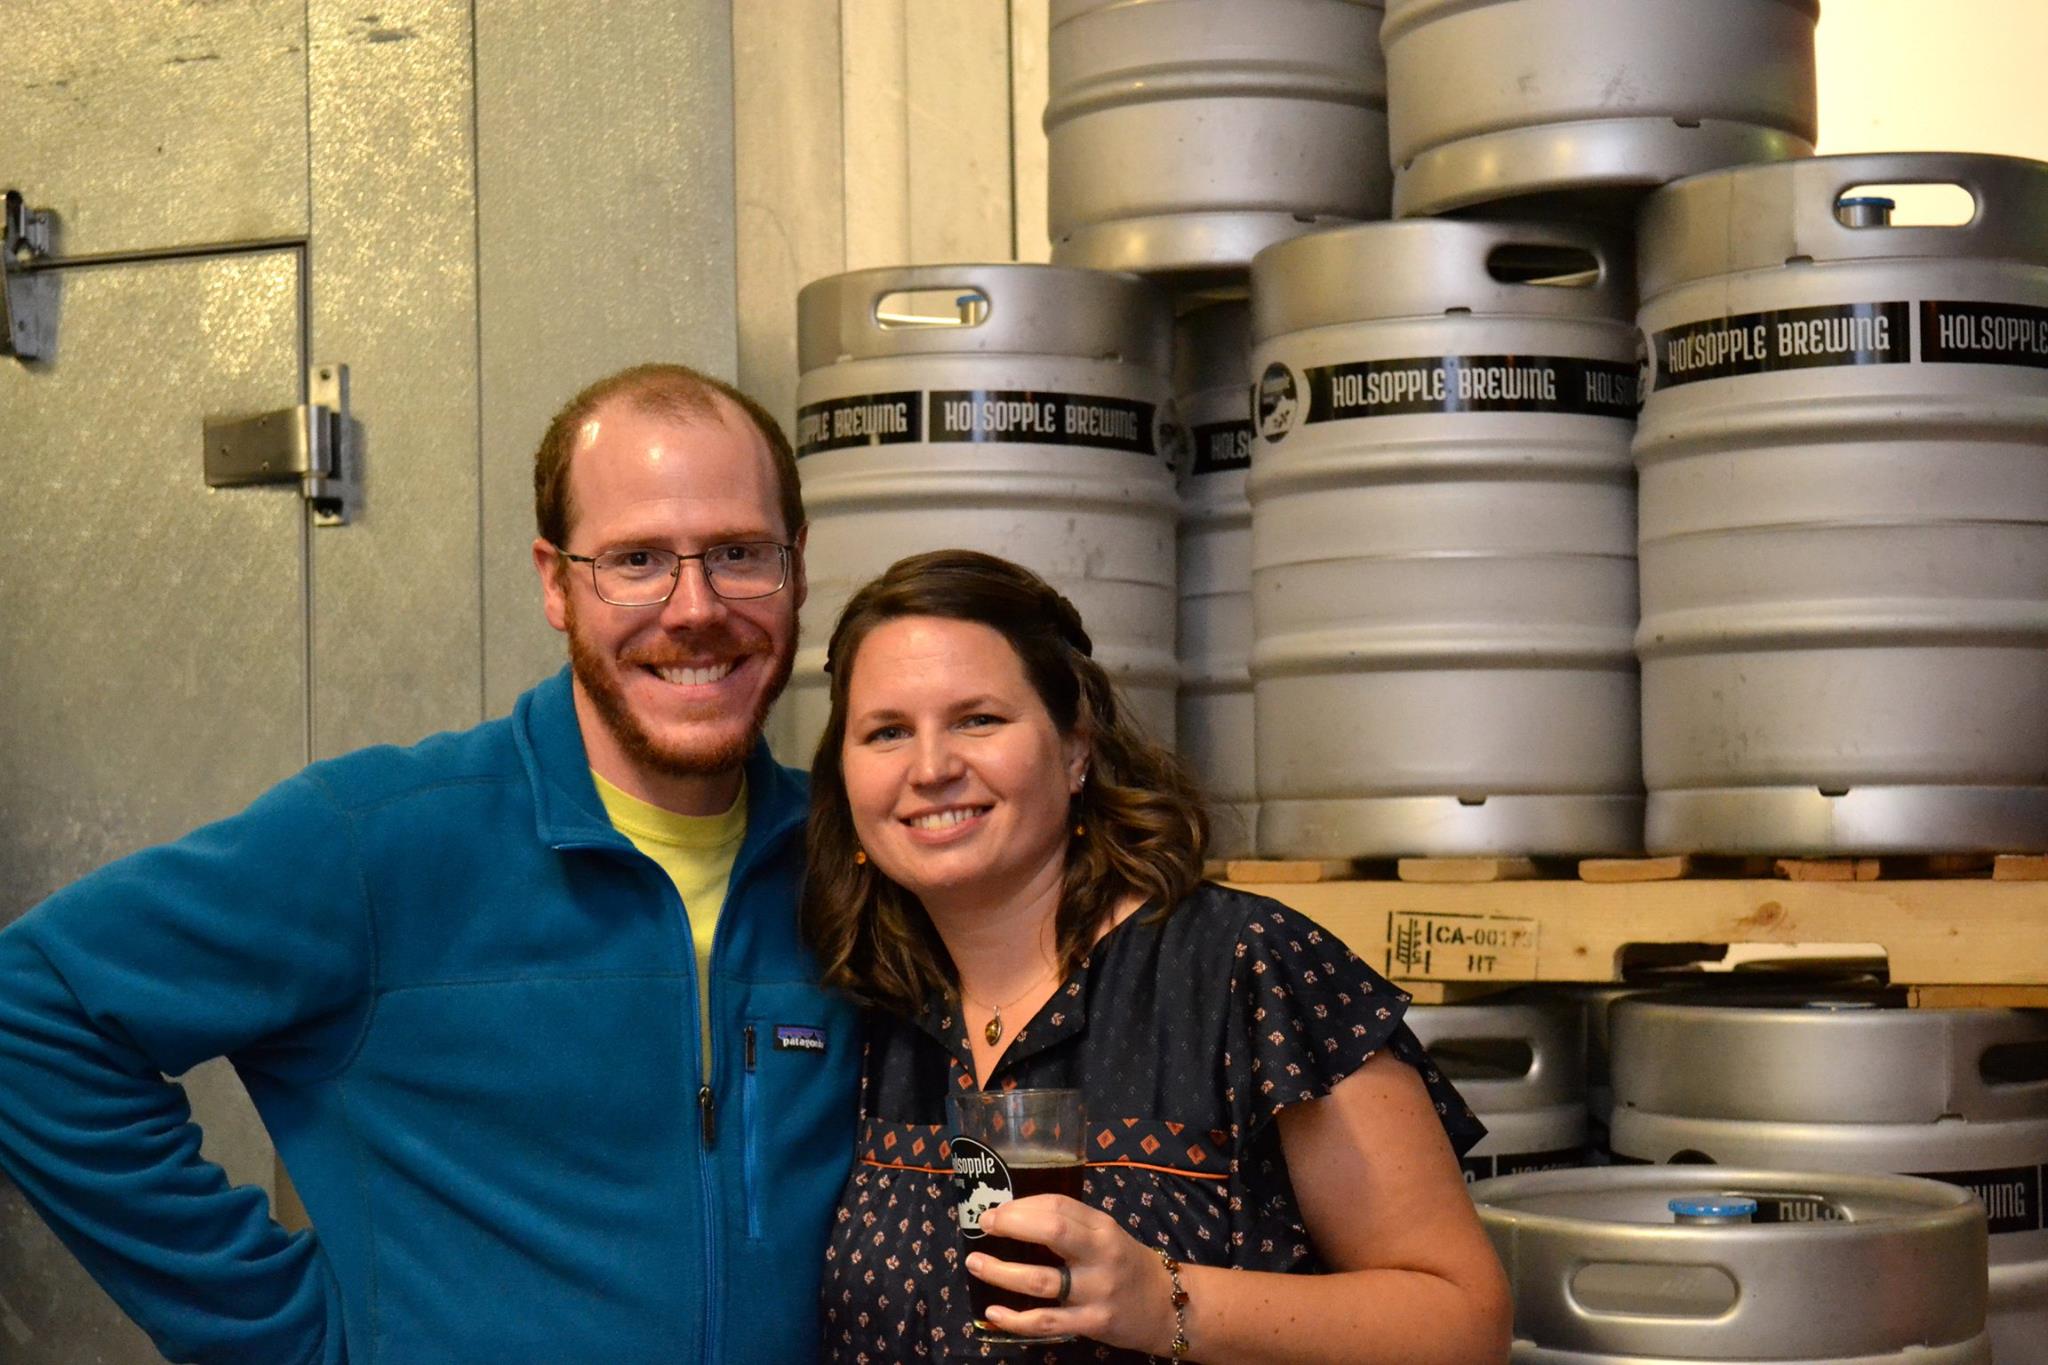 Owners of Holsopple Brewing talk beer at Beer with a Scientist Feb. 26